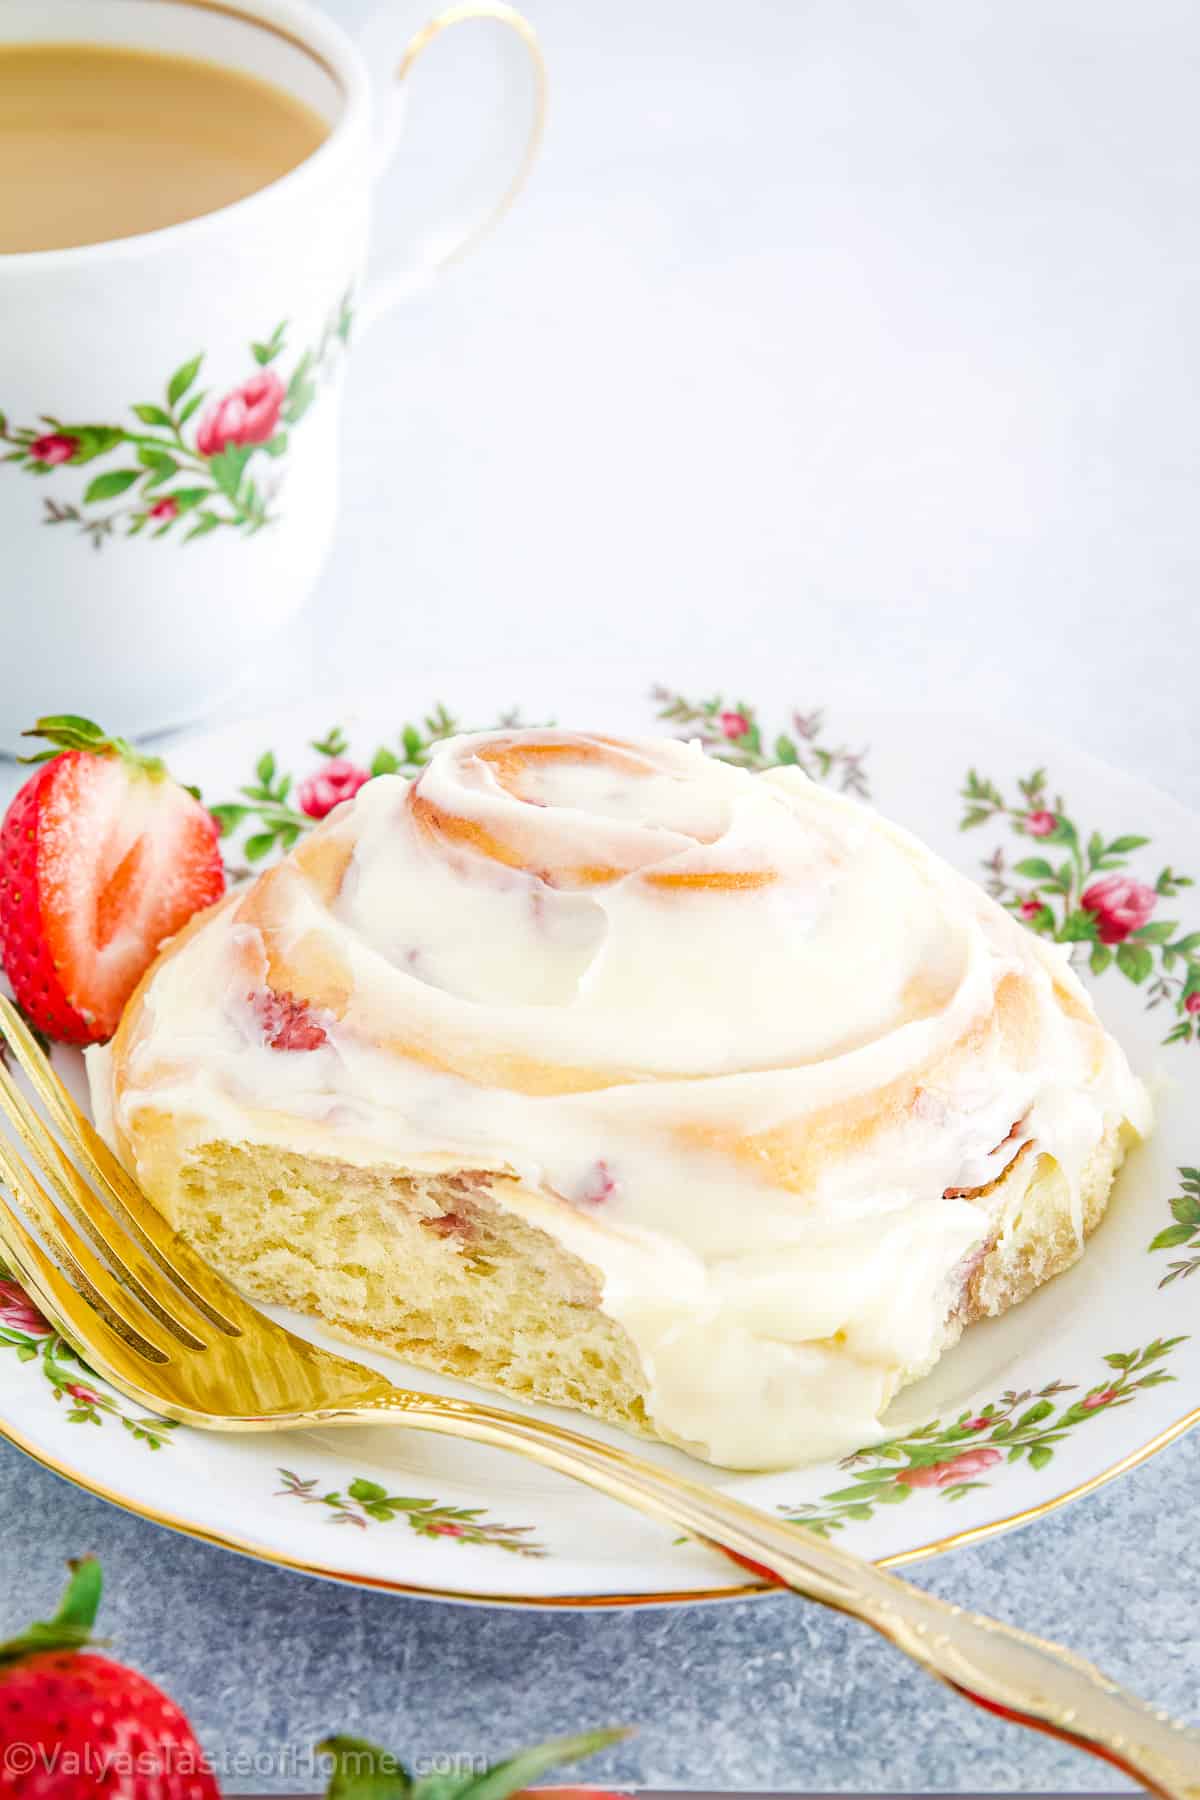 These strawberry cinnamon rolls are perfect for a lazy weekend breakfast, a special occasion brunch, or just anytime you want to treat yourself to something sweet and delicious.